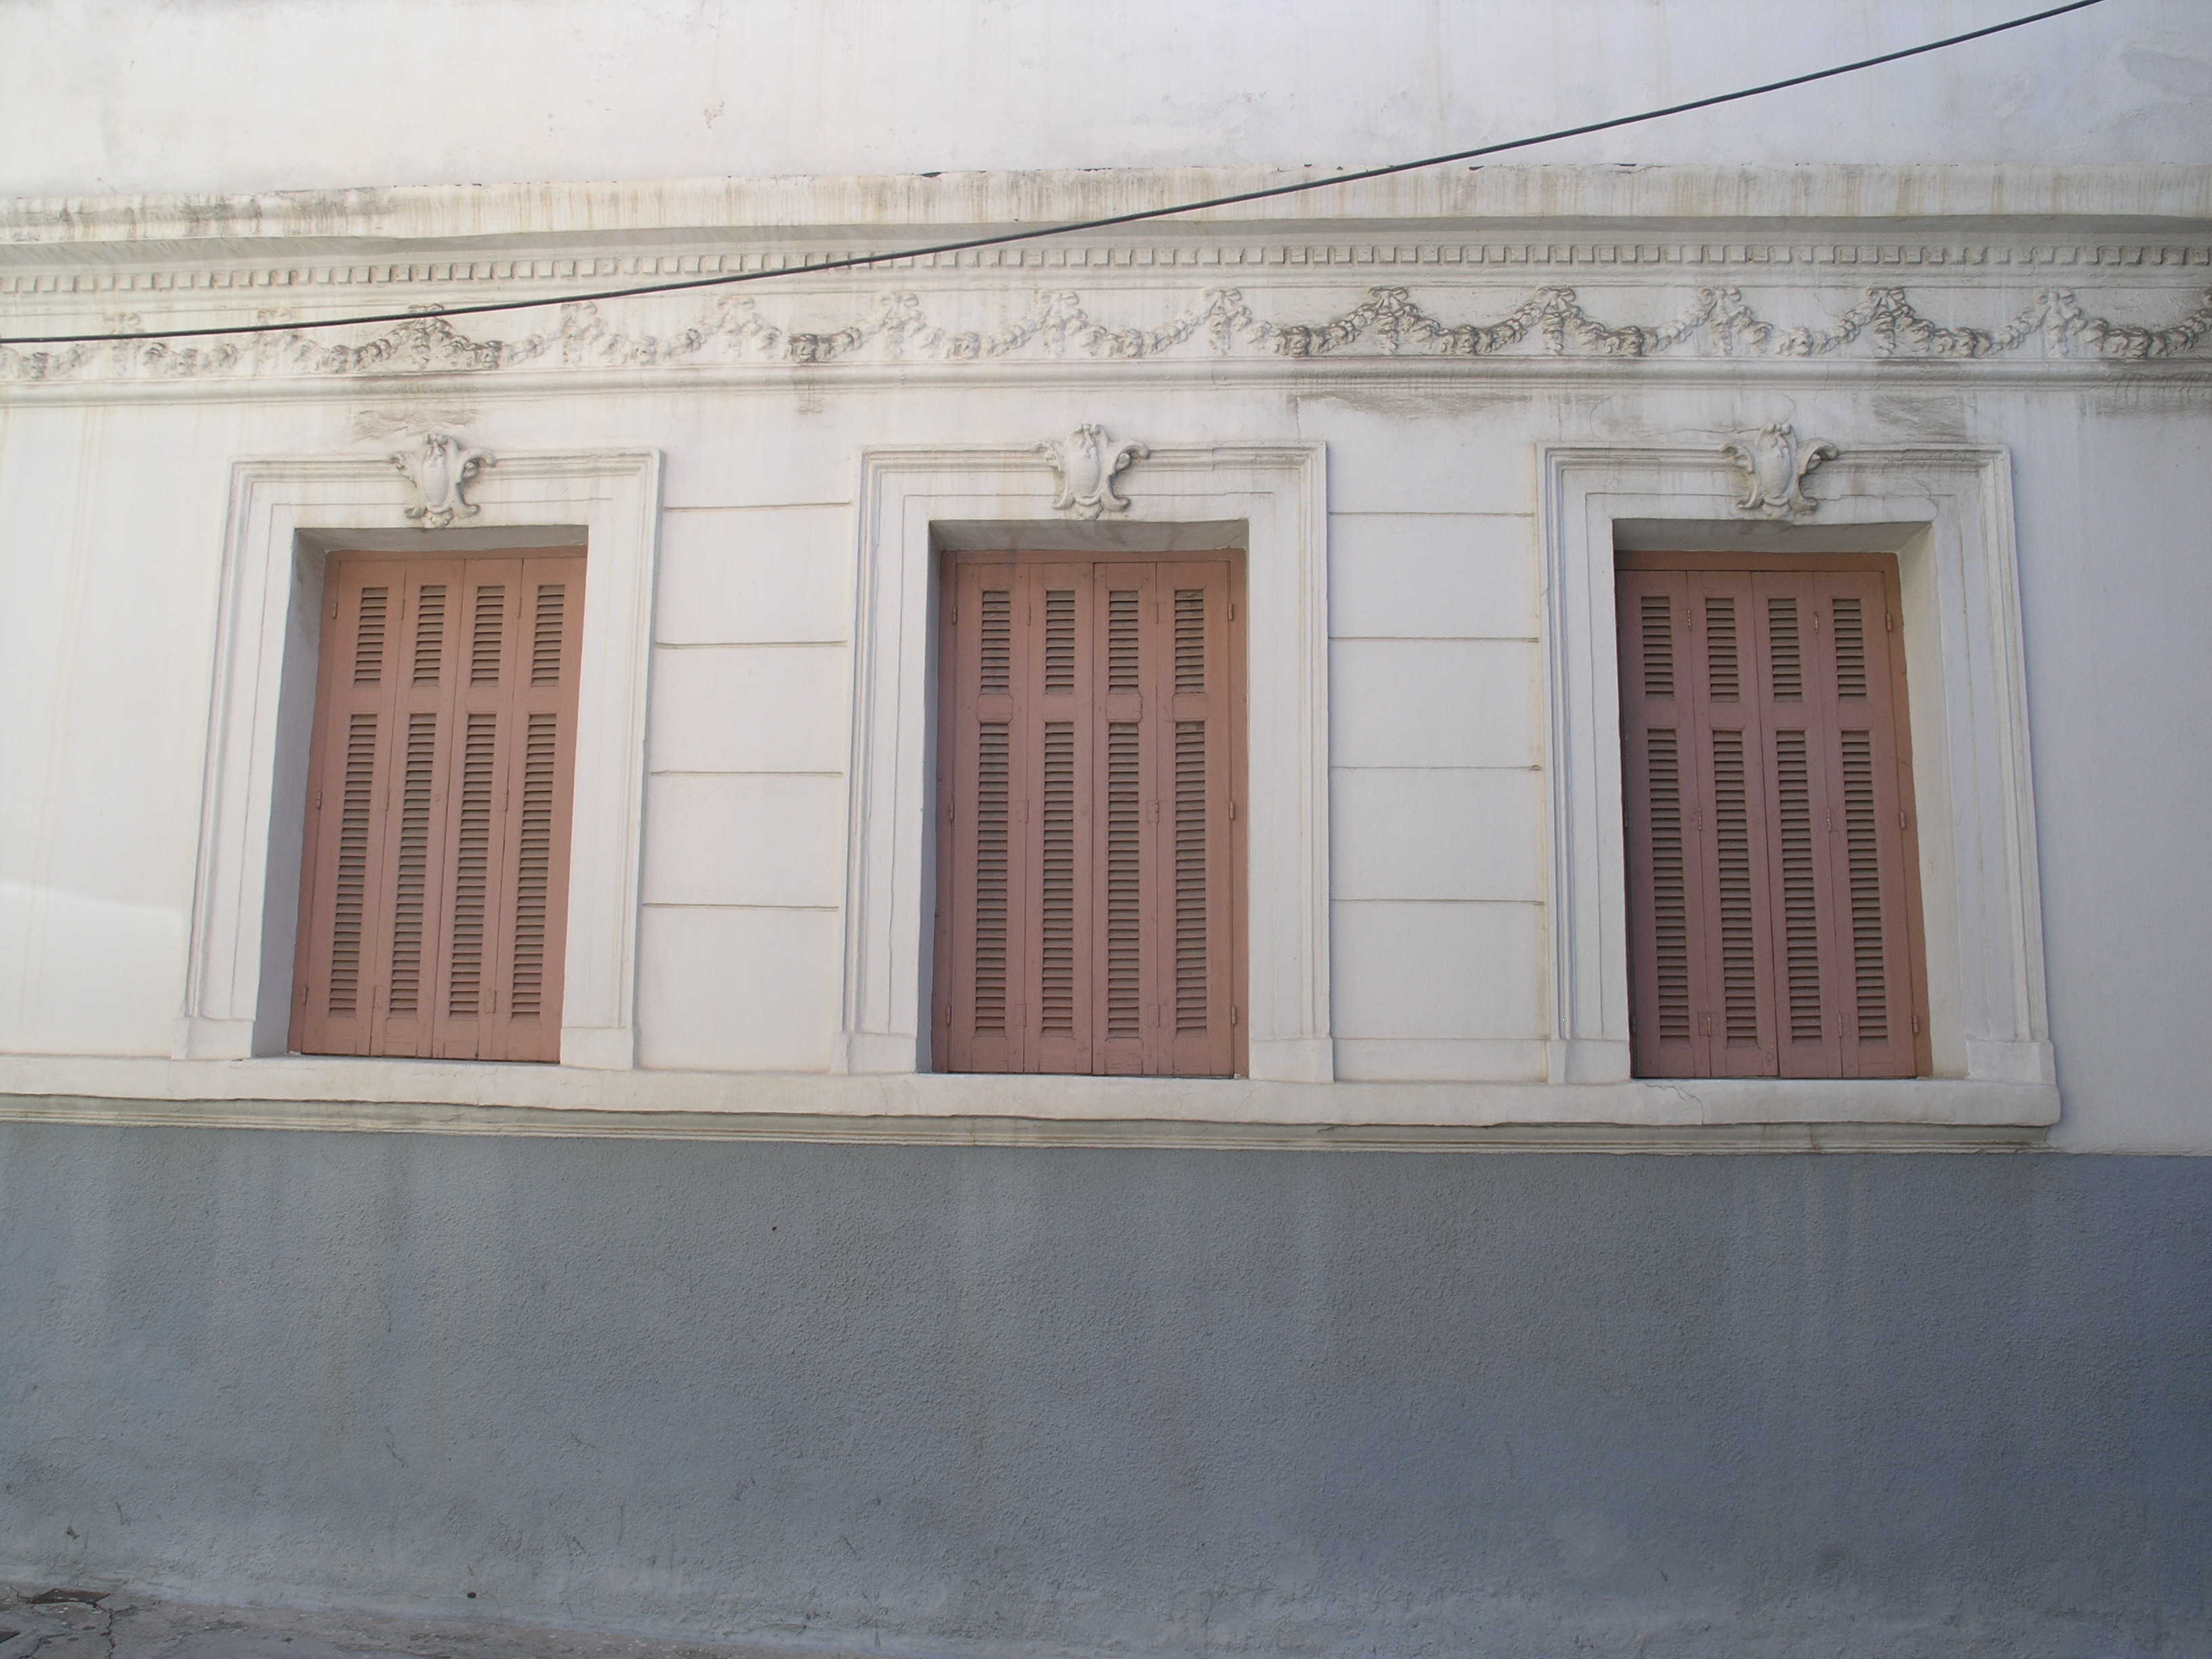 View of the windows